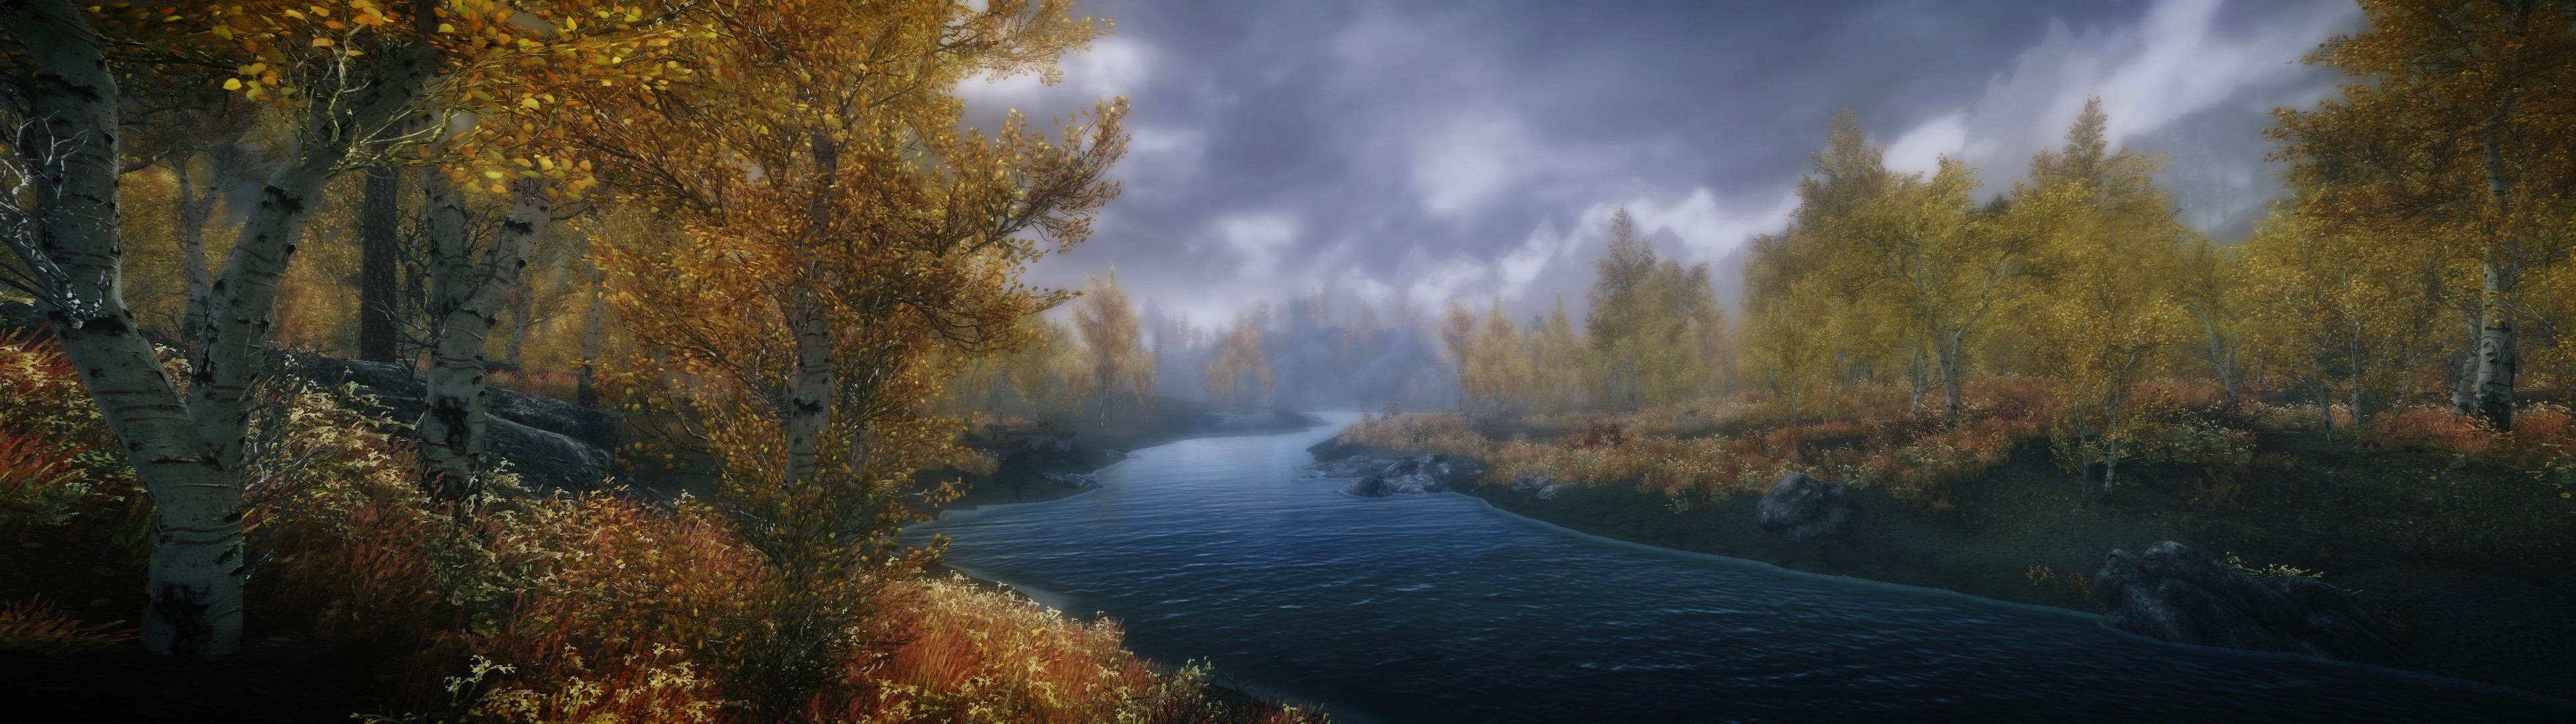 1.9.32.0.8 skyrim patch download